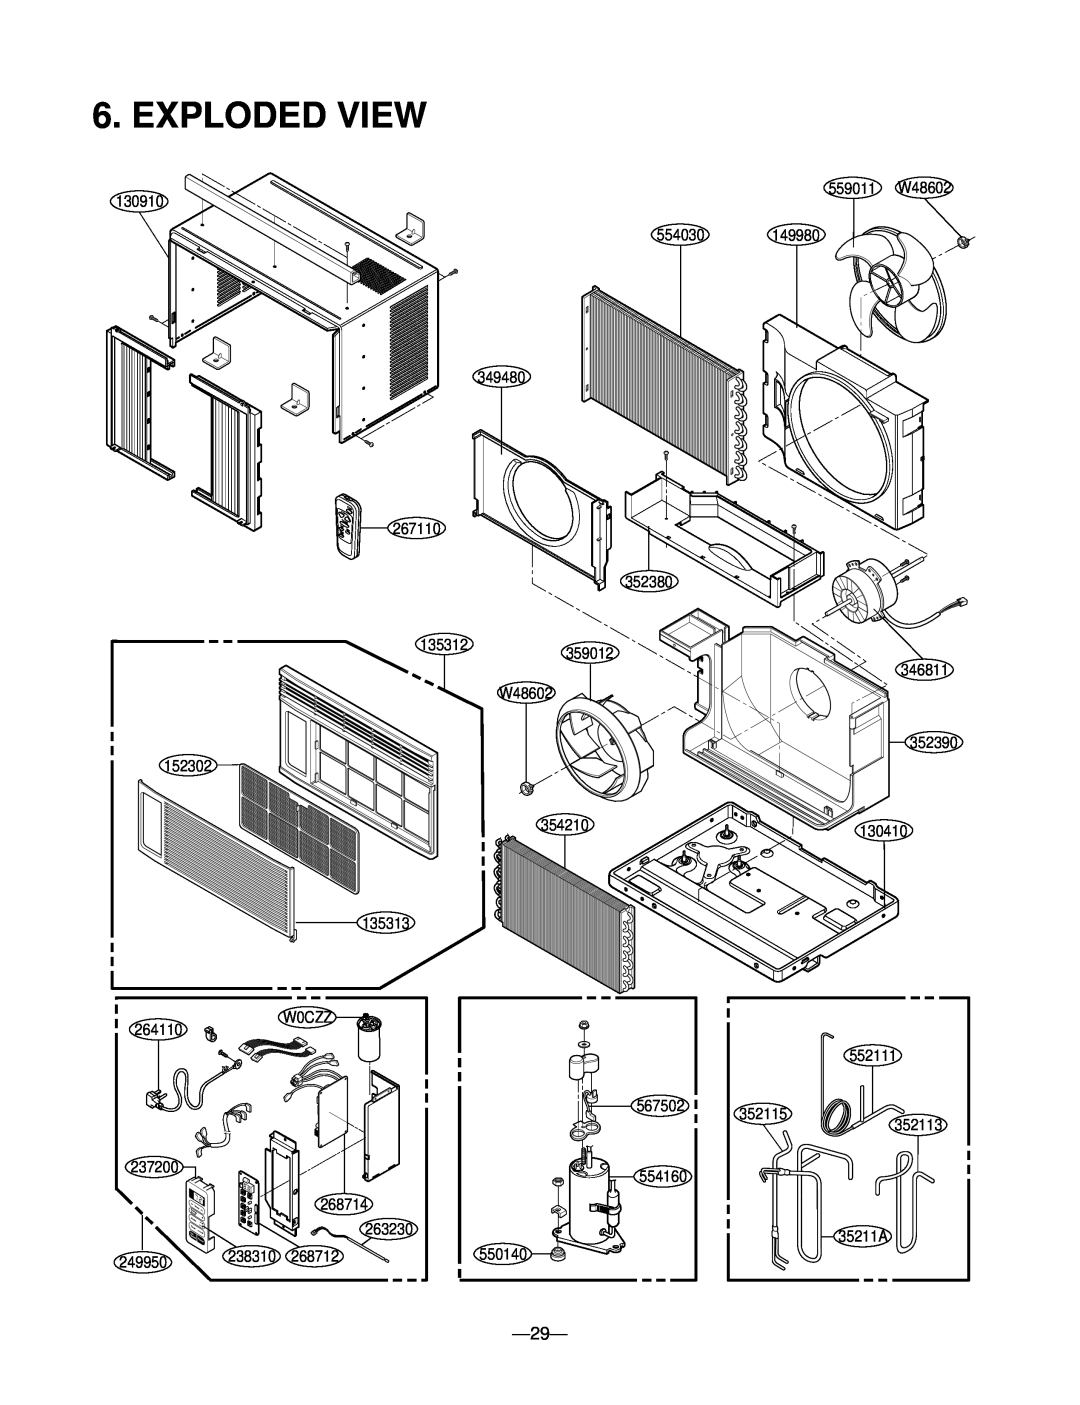 Goldstar M6003R, WM-6011, M5403R, M5203L, M5203R, LWC061JGMK1, LWJ0611PCG service manual Exploded View 